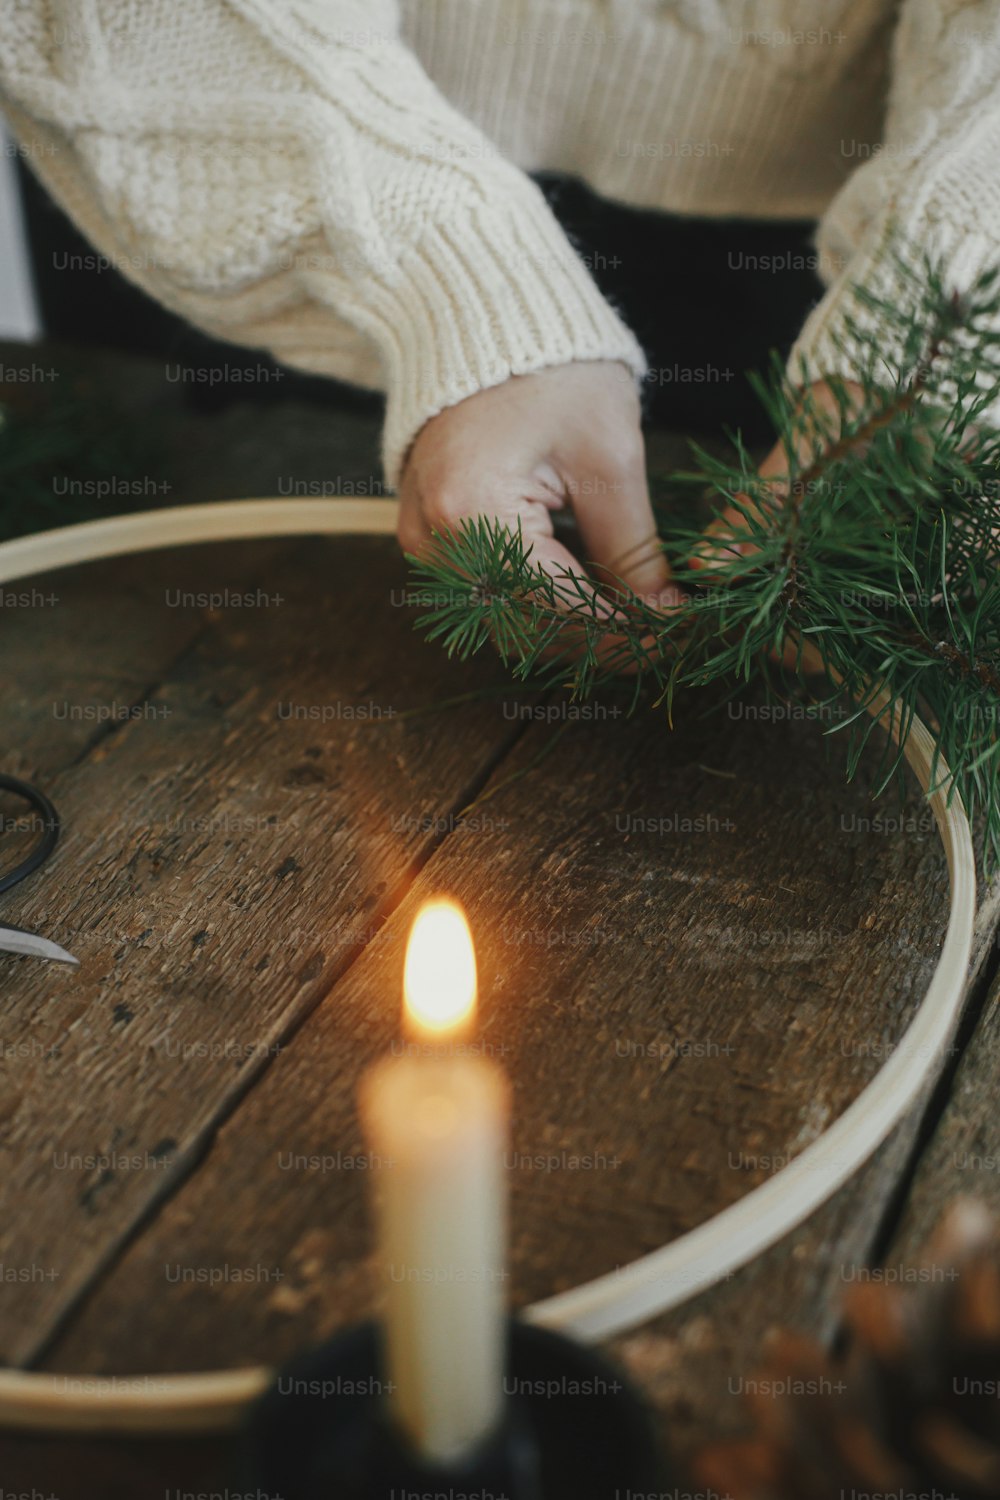 Hands making modern christmas wreath on rustic table with fir branches, ribbons, round wooden hoop, scissors, thread, candle. Atmospheric moody image. Winter holidays preparation